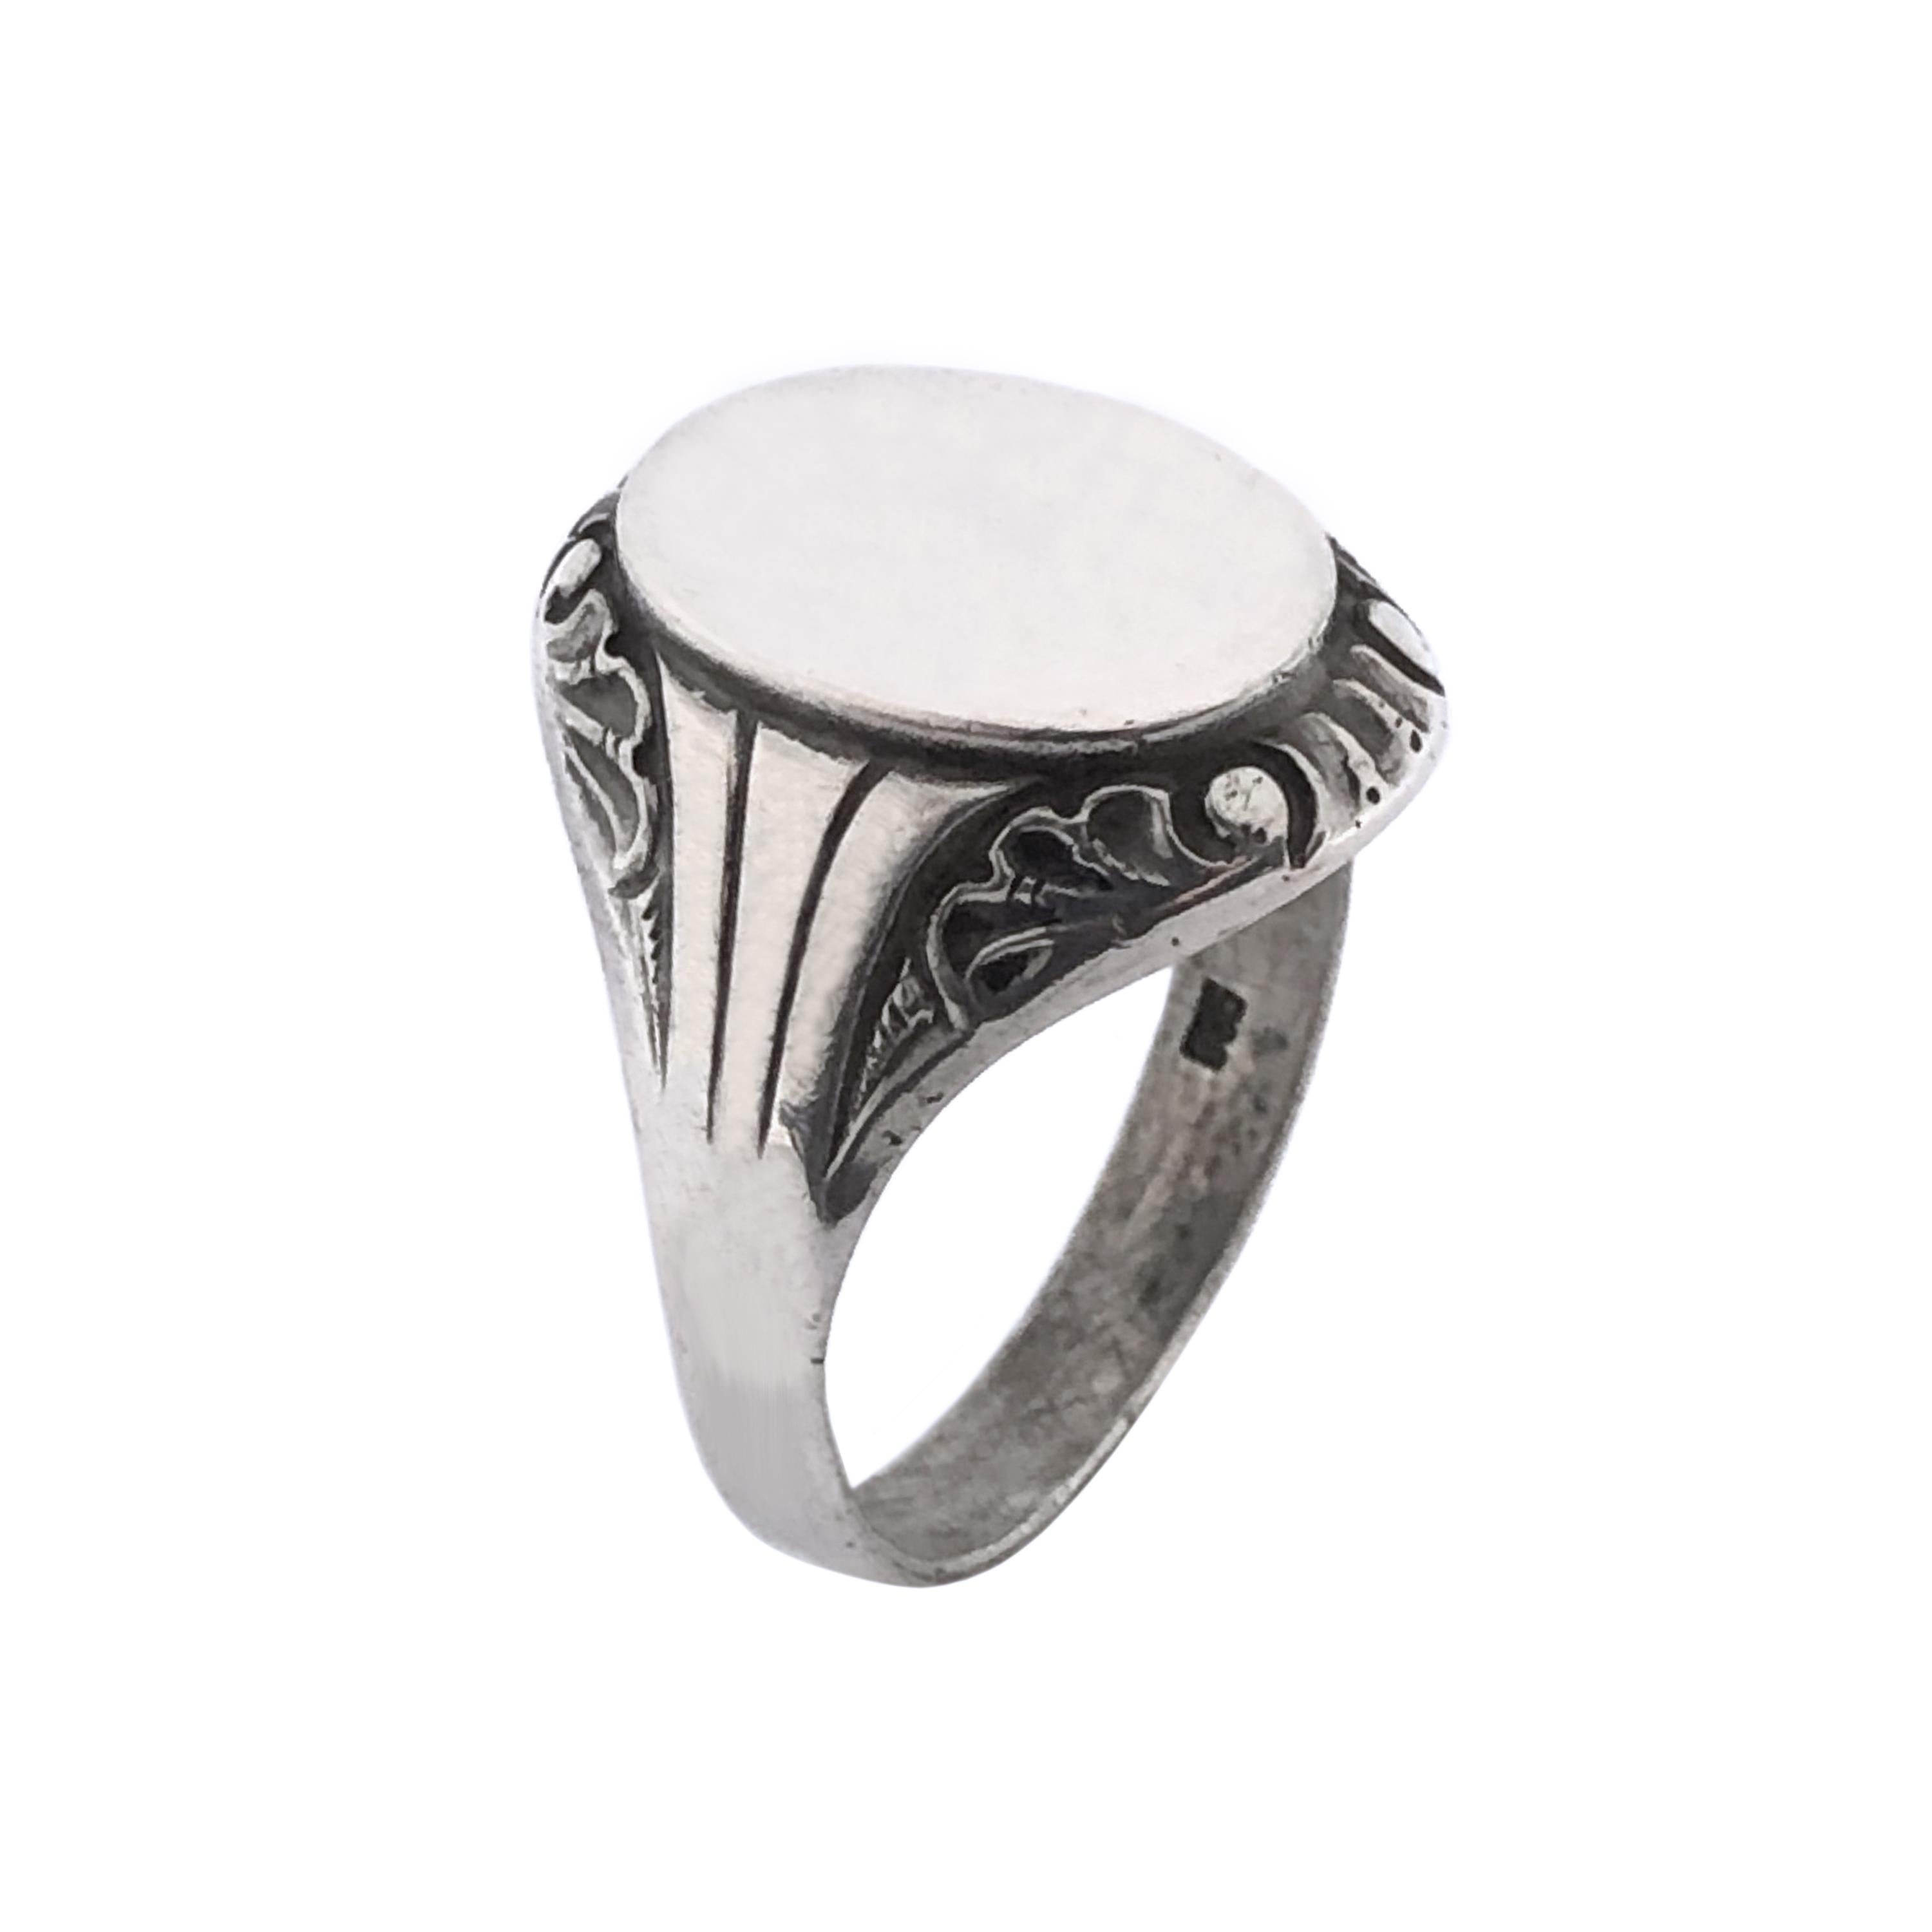 Circa 1920s 1930s 835 European stamped Sterling silver Signet Ring, the oval top of the ring measures 5/8 X 3/8 inch, This ring was never engraved and is ready for your custom initials or crest, finger size 10.